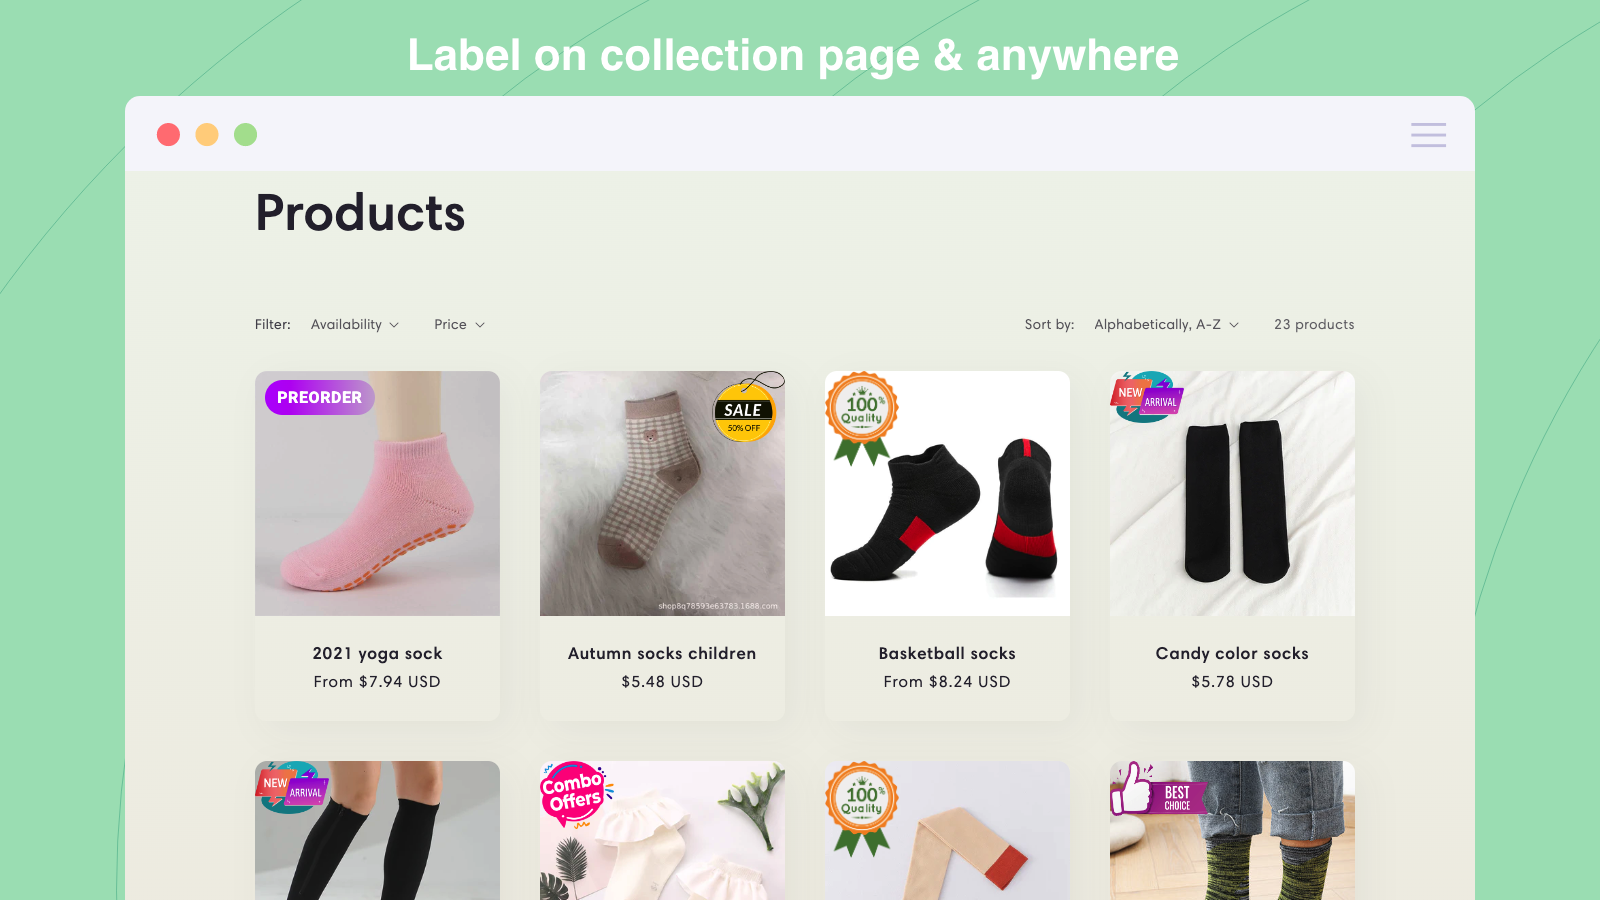 Product labels on collection page or any pages